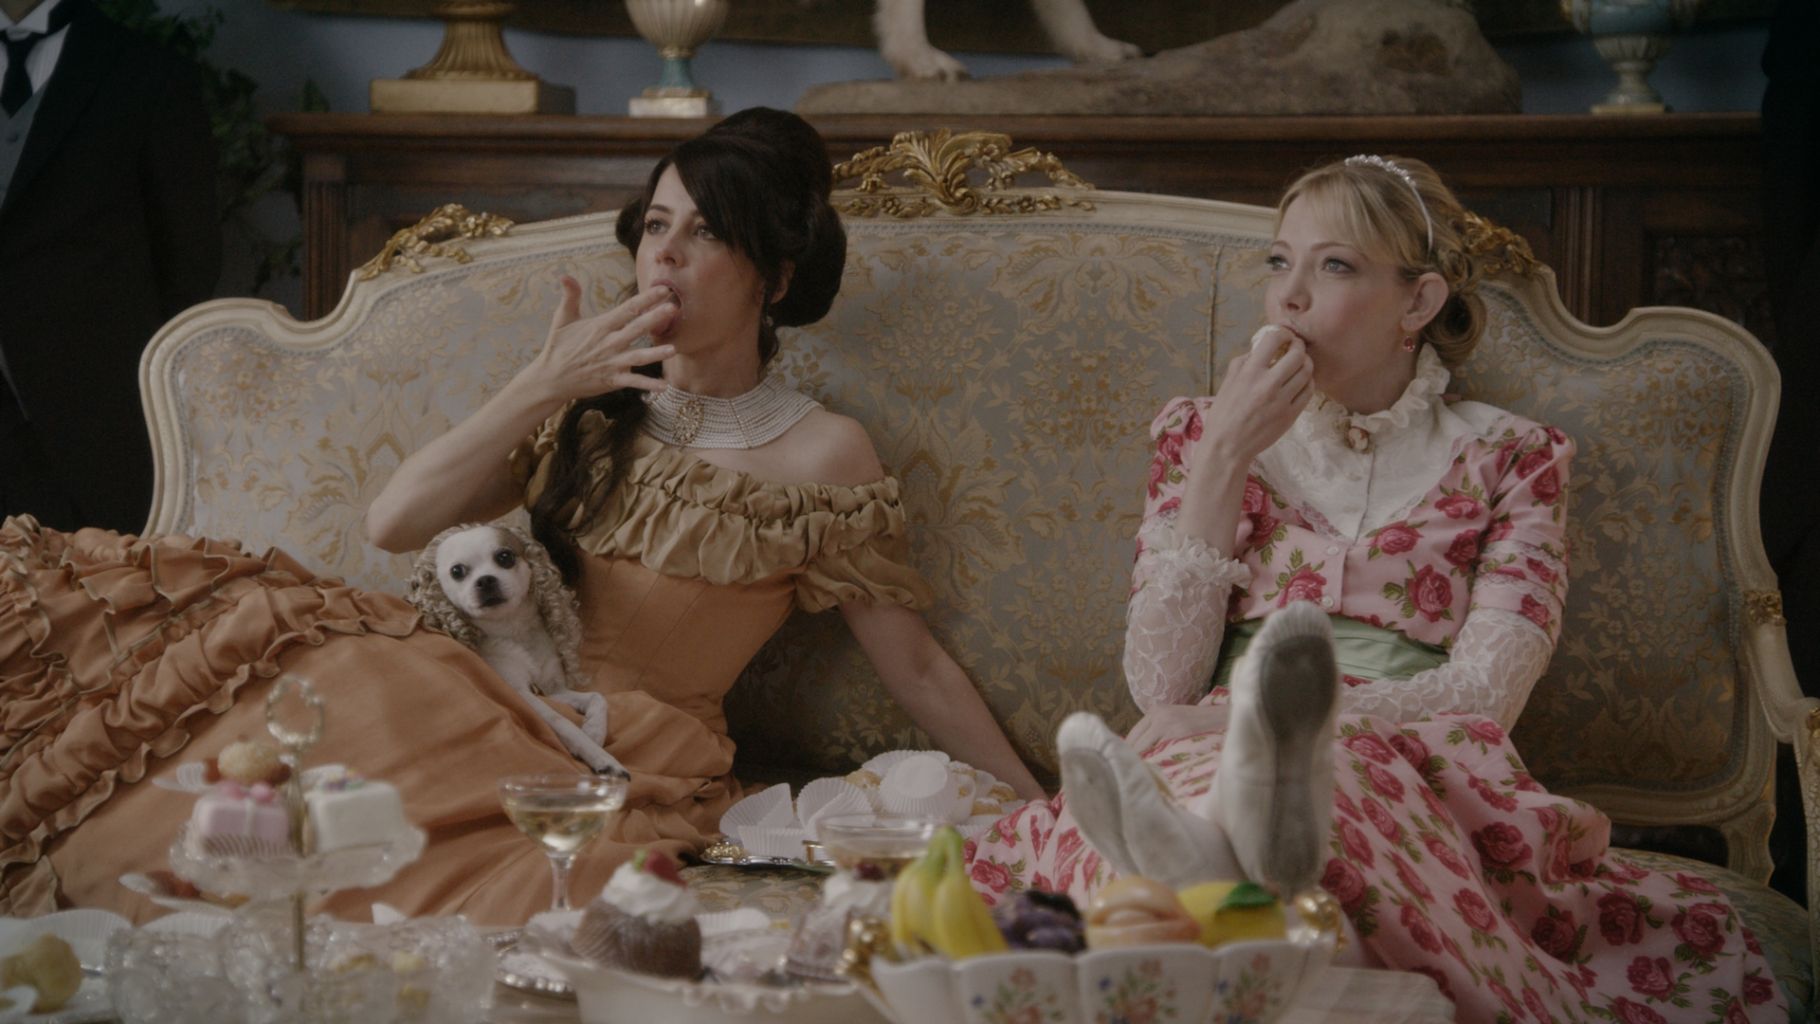 Comedy Central rounds out cast for upcoming series, “Another Period,” with Natasha Leggero and Riki Lindhome